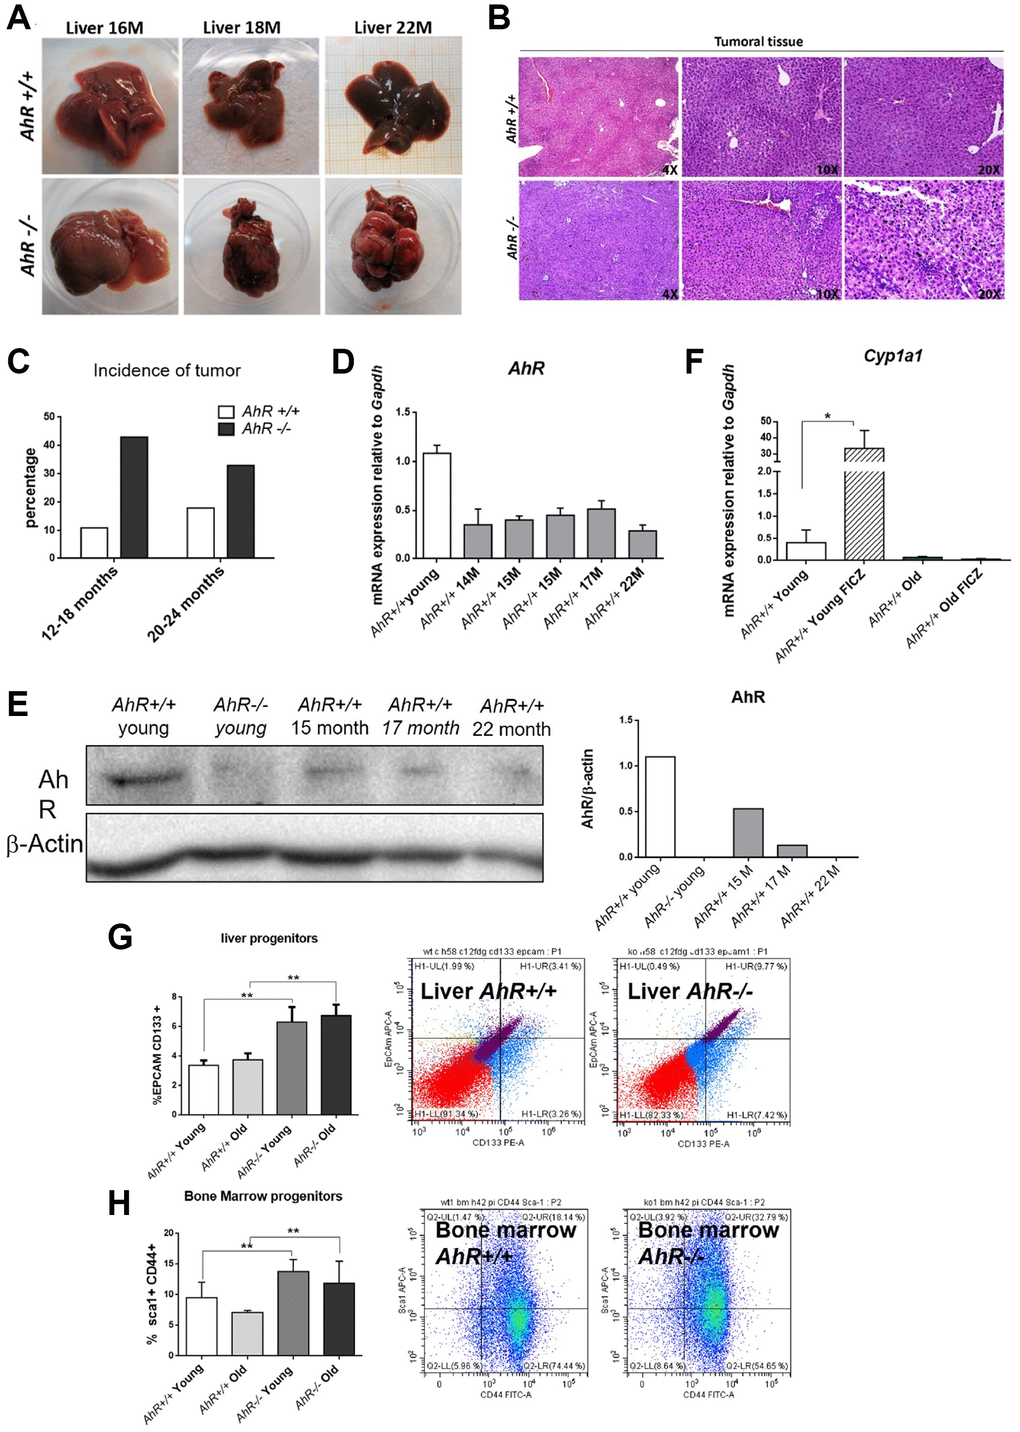 AhR depletion increases liver tumorigenesis with aging. (A) Representative tumors developed by AhR+/+ and AhR−/− at the indicated ages. (B) Haematoxylin and Eosin staining of liver tumor sections from AhR+/+ and AhR−/− mice at 22 months of age. Note the abundance of pycnotic nuclei in AhR−/− tumors. (C) Quantification of the number of liver tumors in mice of both genotypes at two age intervals. (D) AhR mRNA levels in AhR+/+ livers at the indicated ages using RT-qPCR and the oligonucleotides indicated in Supplementary Table 1. (E) AhR protein levels were analyzed in liver extracts at the indicated ages by immunoblotting. β-Actin was used to normalize protein levels. (F) AhR+/+ mice were injected i.p. with 4 mg/kg FICZ and mRNA levels of the AhR canonical target gene Cyp1a1 were determined by RT-qPCR using the oligonucleotides indicated in Supplementary Table 1. (G) Liver progenitor cells were analyzed by FACS using antibodies against CD133-PE and EPCAM-APC. Distribution of cell subpopulations and gating from representative experiments are shown. (H) Bone marrow progenitor cells were analyzed by FACS using the markers CD44-FITC and Sca1-APC. Distribution of cell subpopulations and gating from representative experiments are shown. Gapdh was used to normalize target gene expression (△Ct) and 2−△△Ct to calculate changes in mRNA levels with respect to wild type or untreated conditions. Data are shown as mean + SD (*P **P 